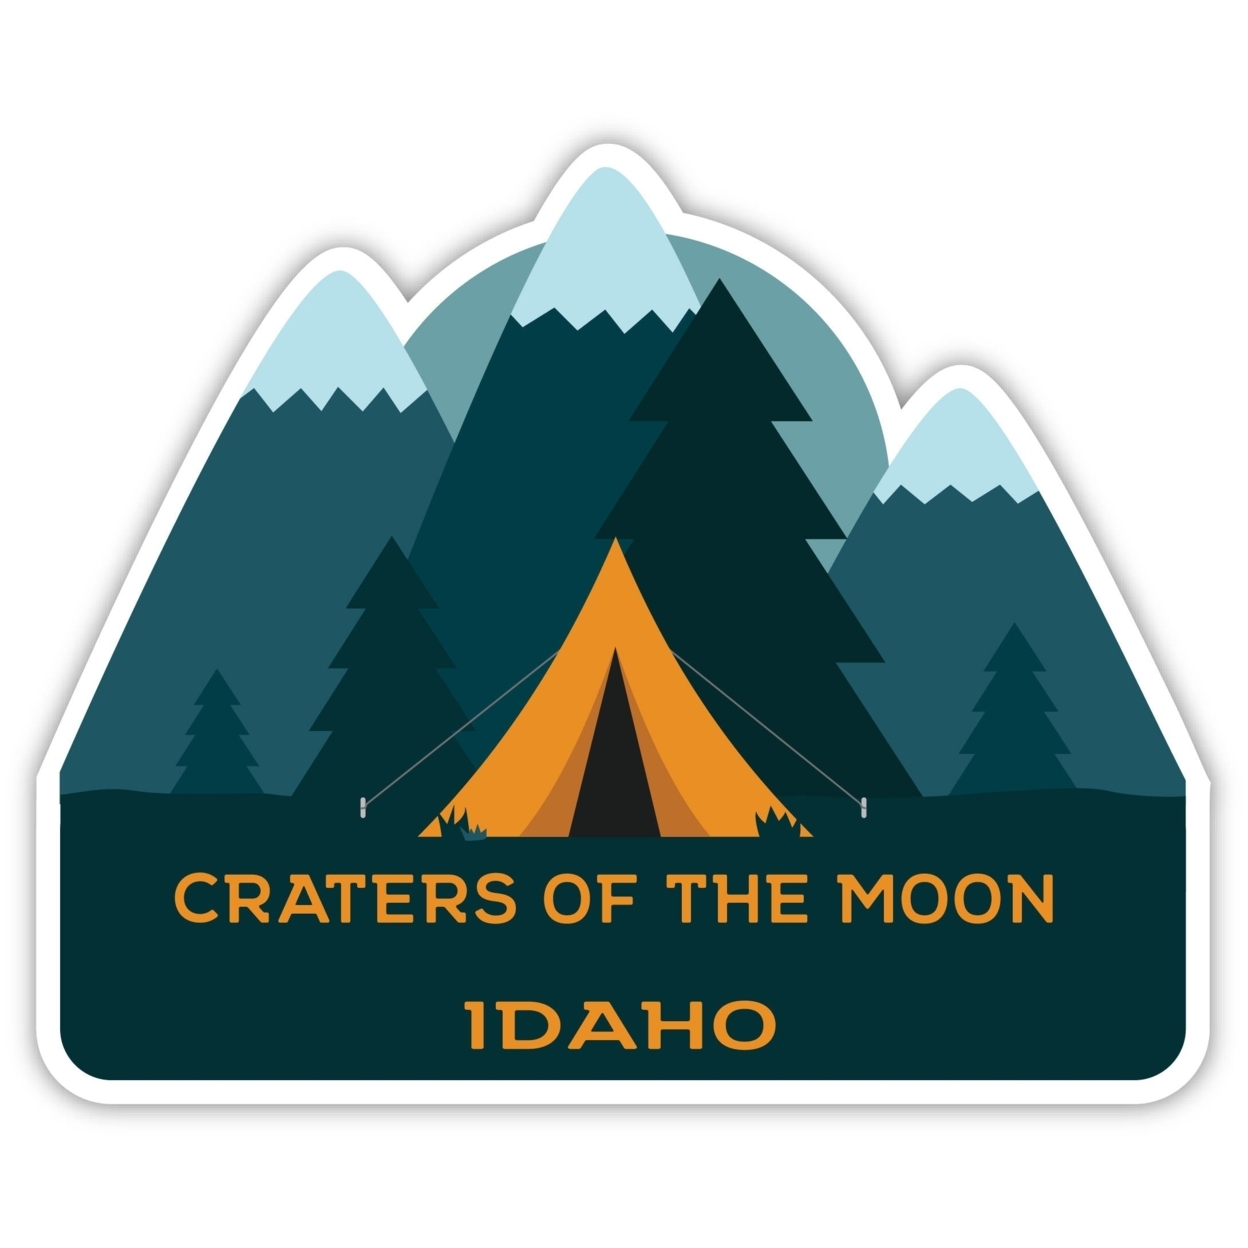 Craters Of The Moon Idaho Souvenir Decorative Stickers (Choose Theme And Size) - 4-Pack, 4-Inch, Tent